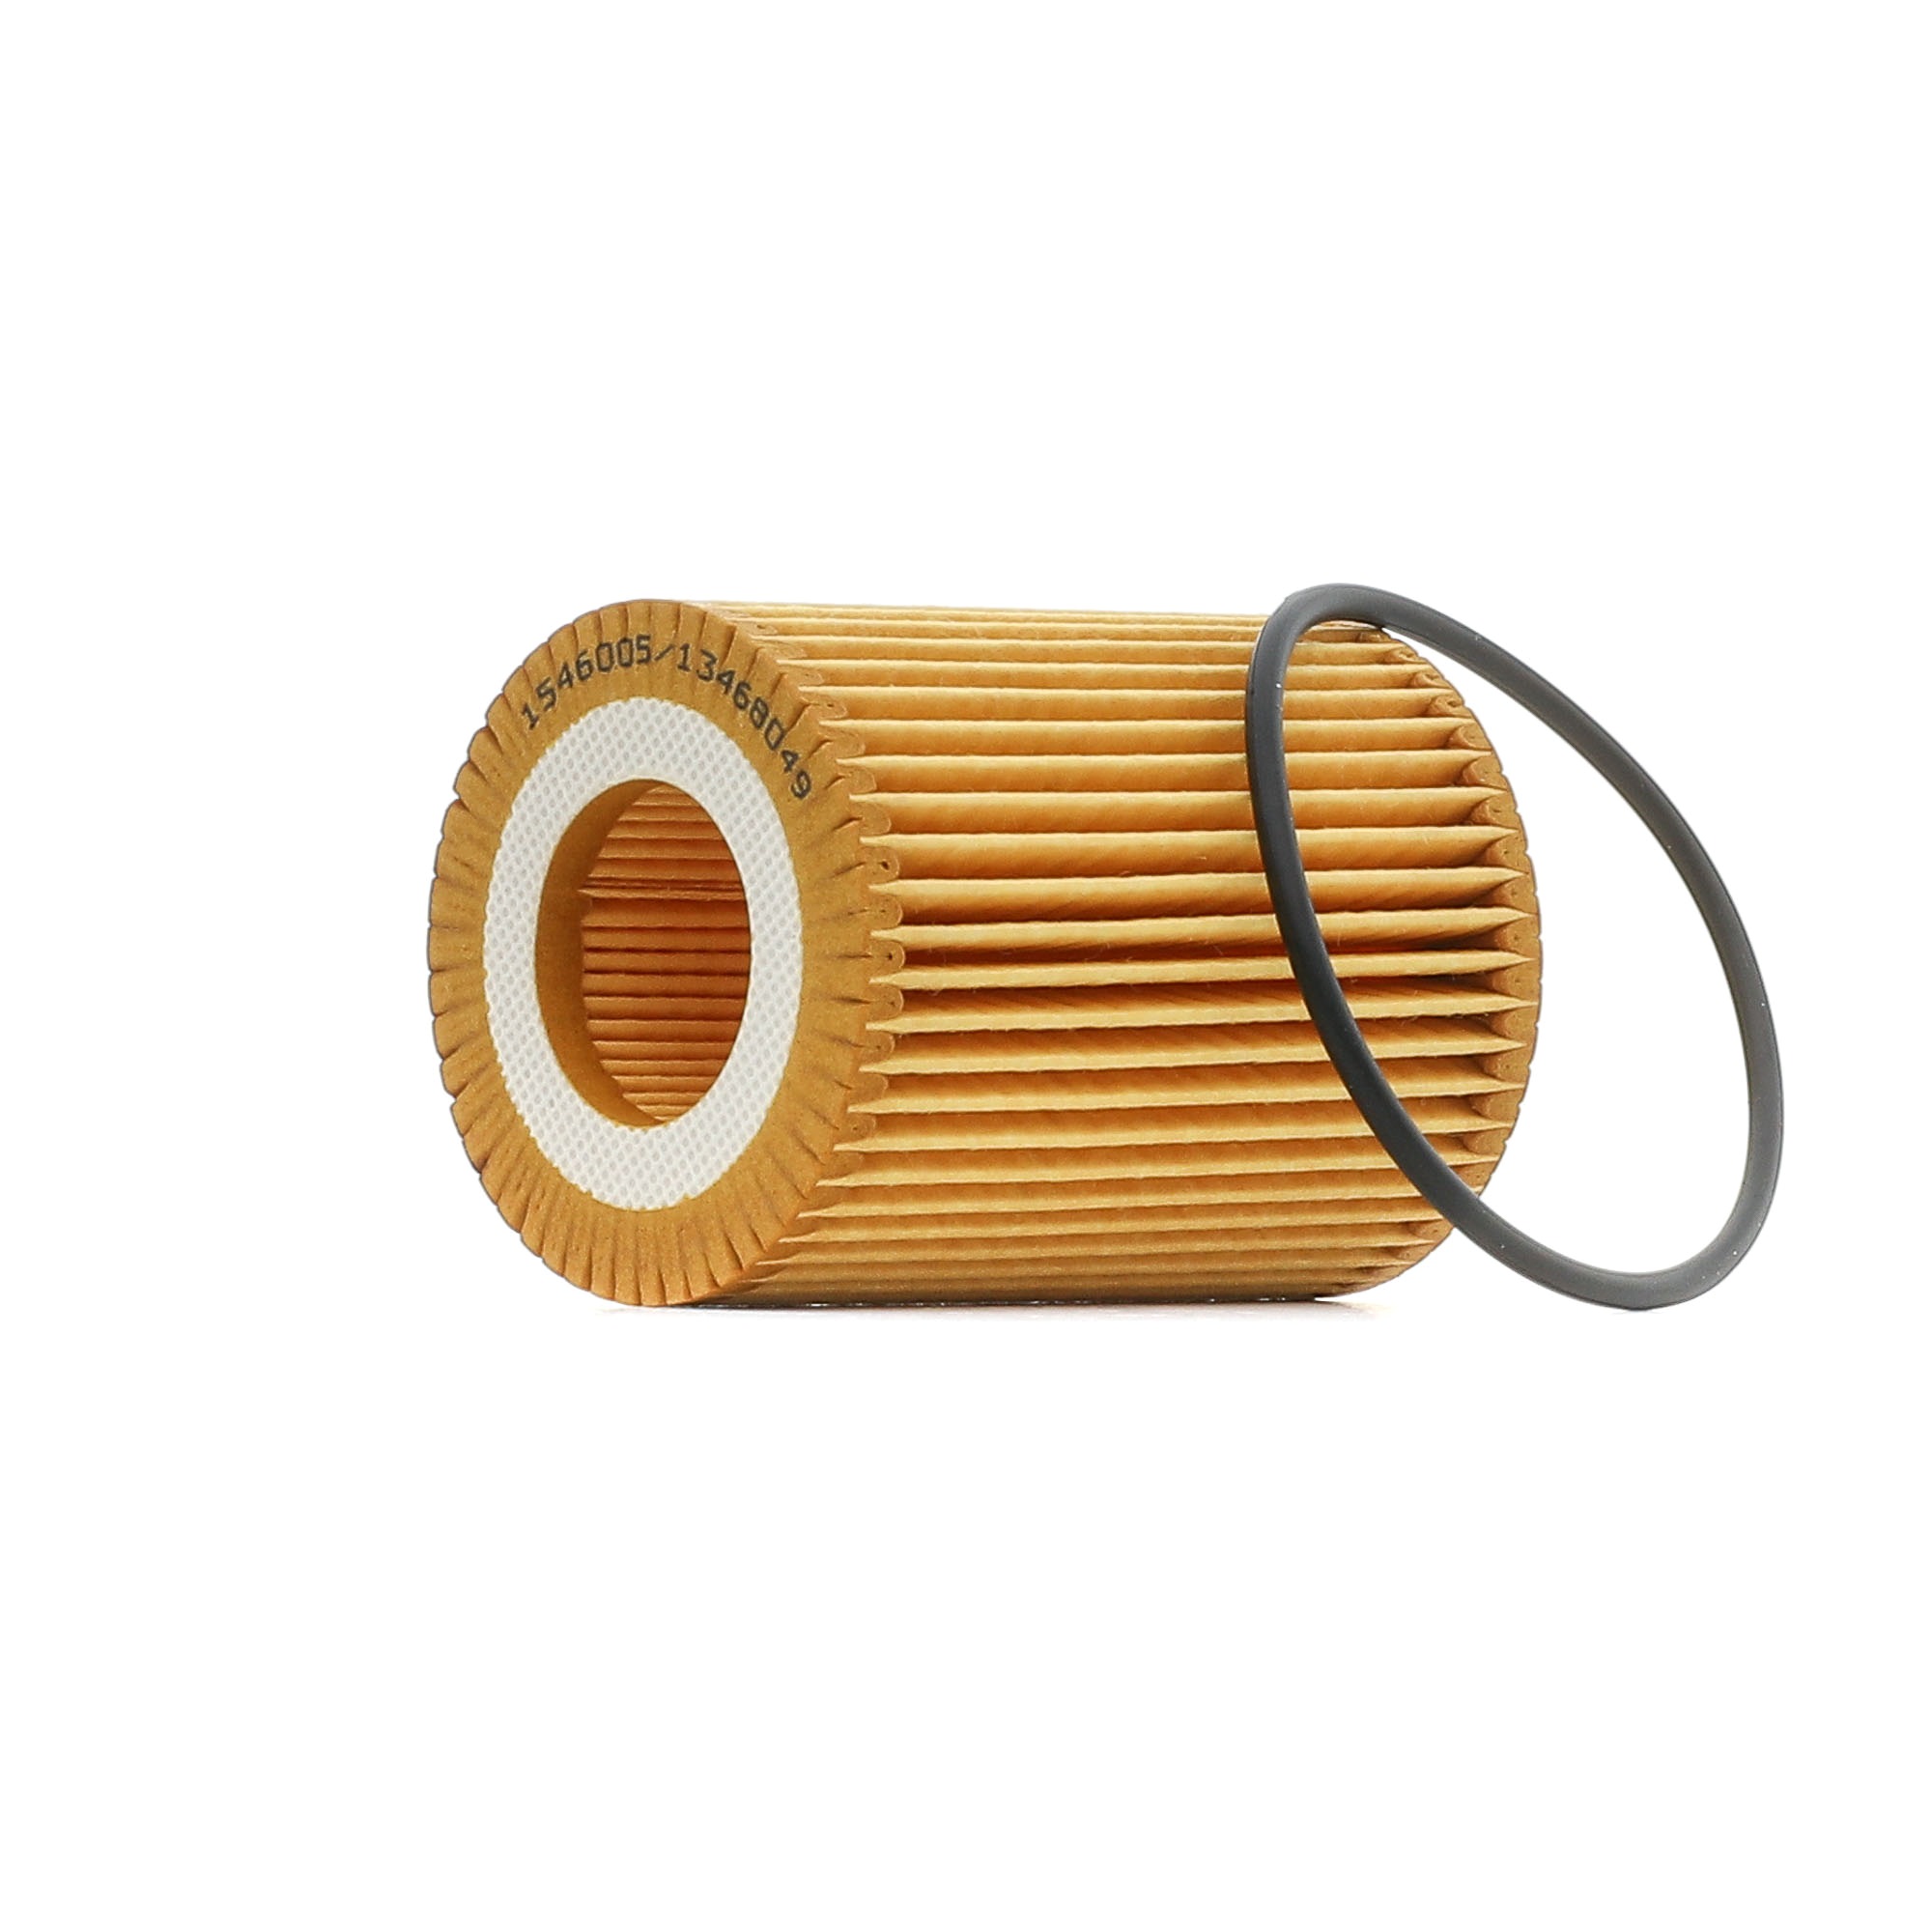 RIDEX 7O0171 Oil filter with gaskets/seals, Filter Insert